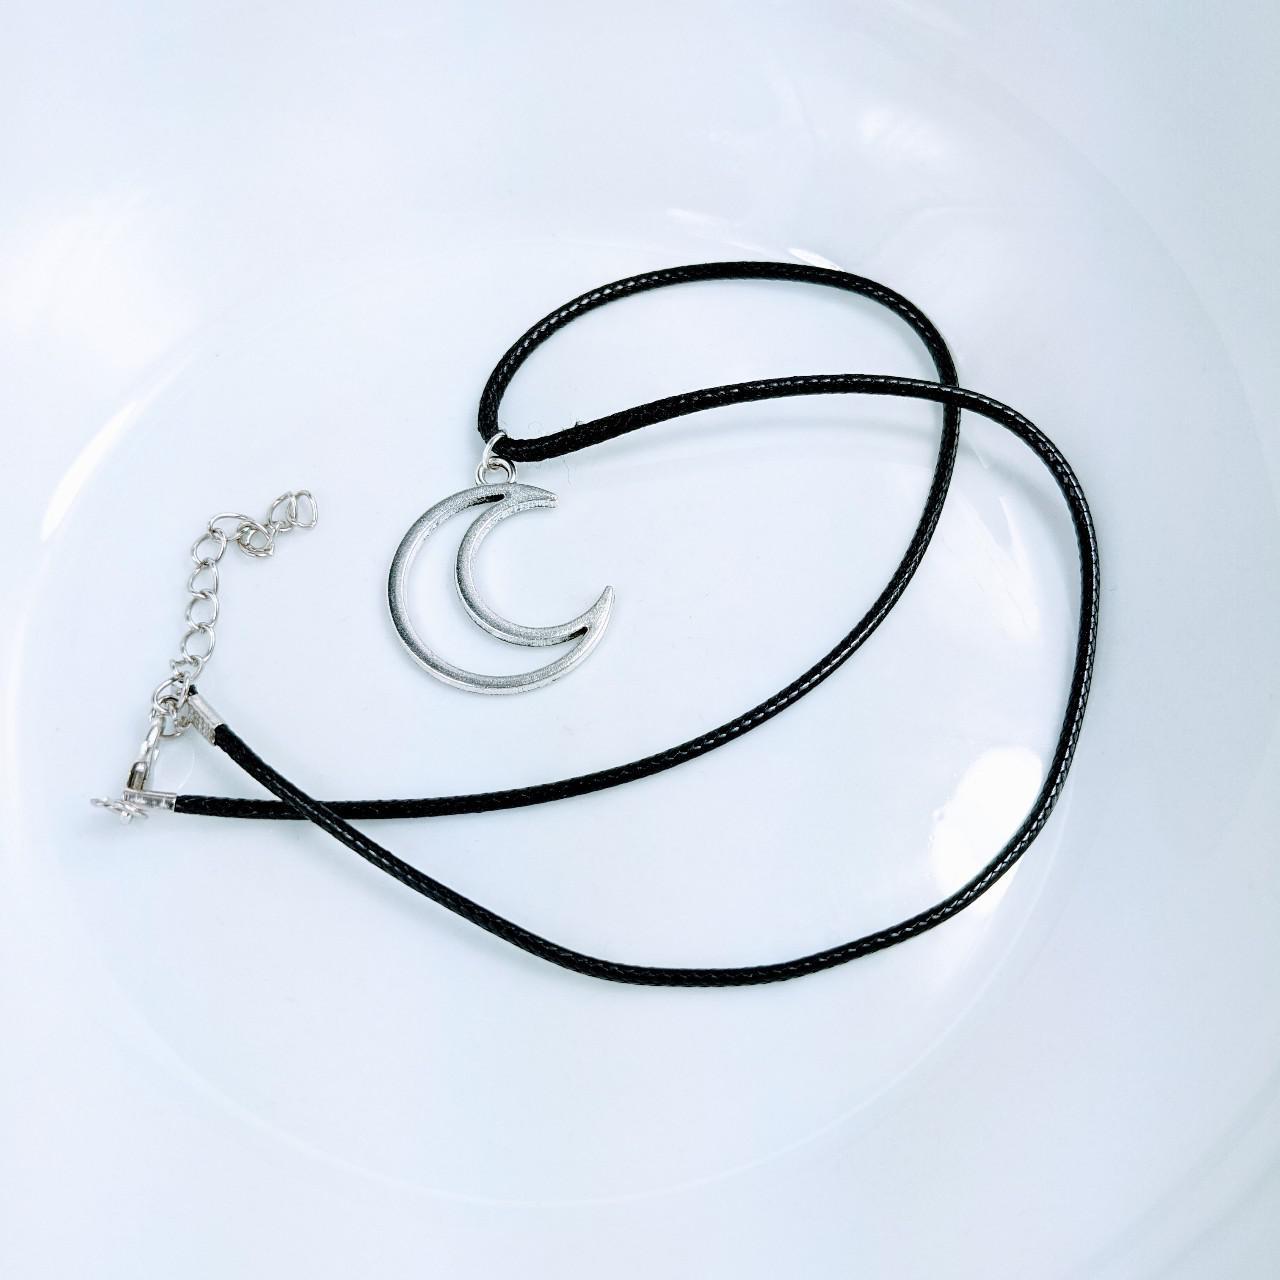 Product Image 2 - Silver Tone Crescent Moon Necklace
Brand